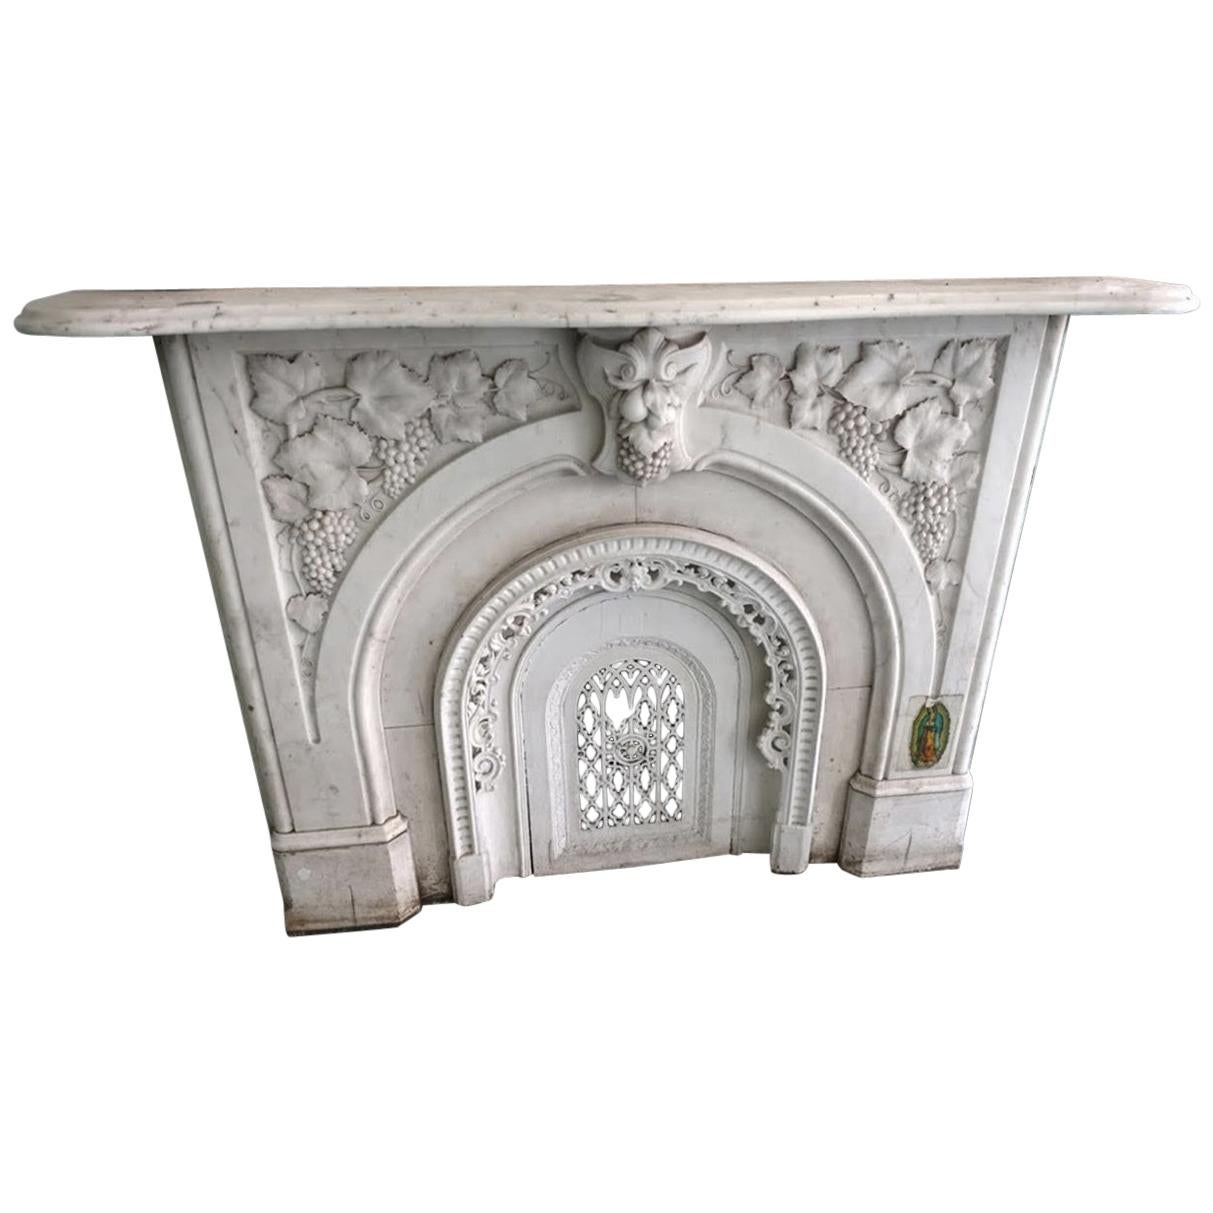 1880s Highly Hand Carved White Carrara Marble Mantel with Grape and Vine Details